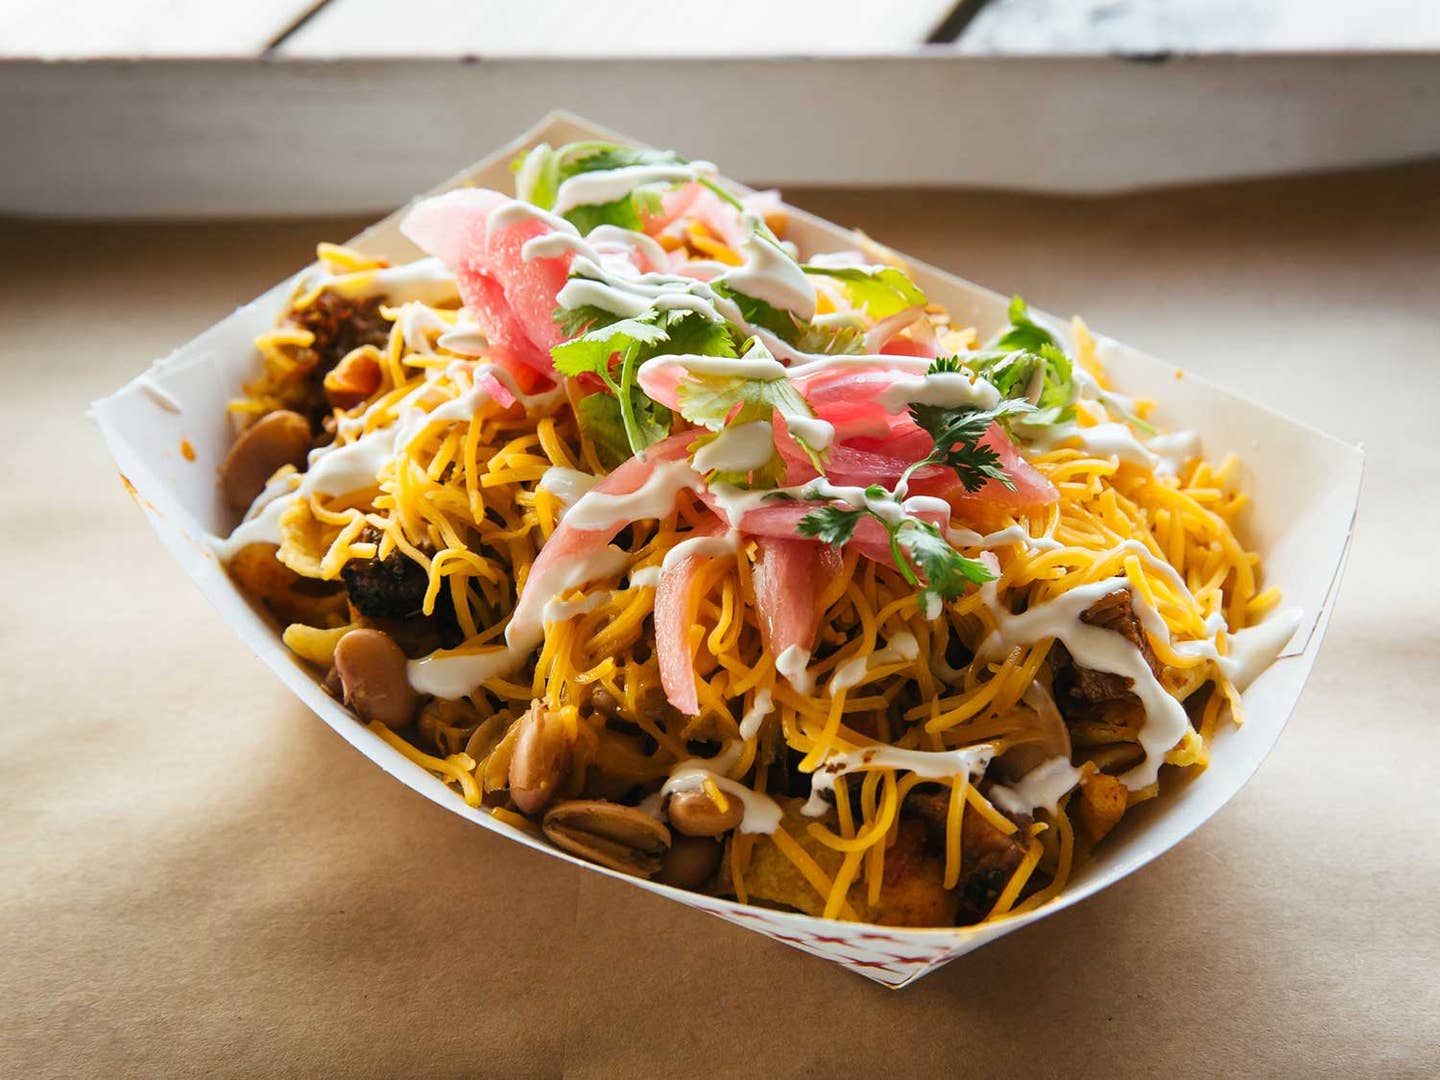 Frito Pie Just Might be Austin’s Best—And Most Customizable—Snack